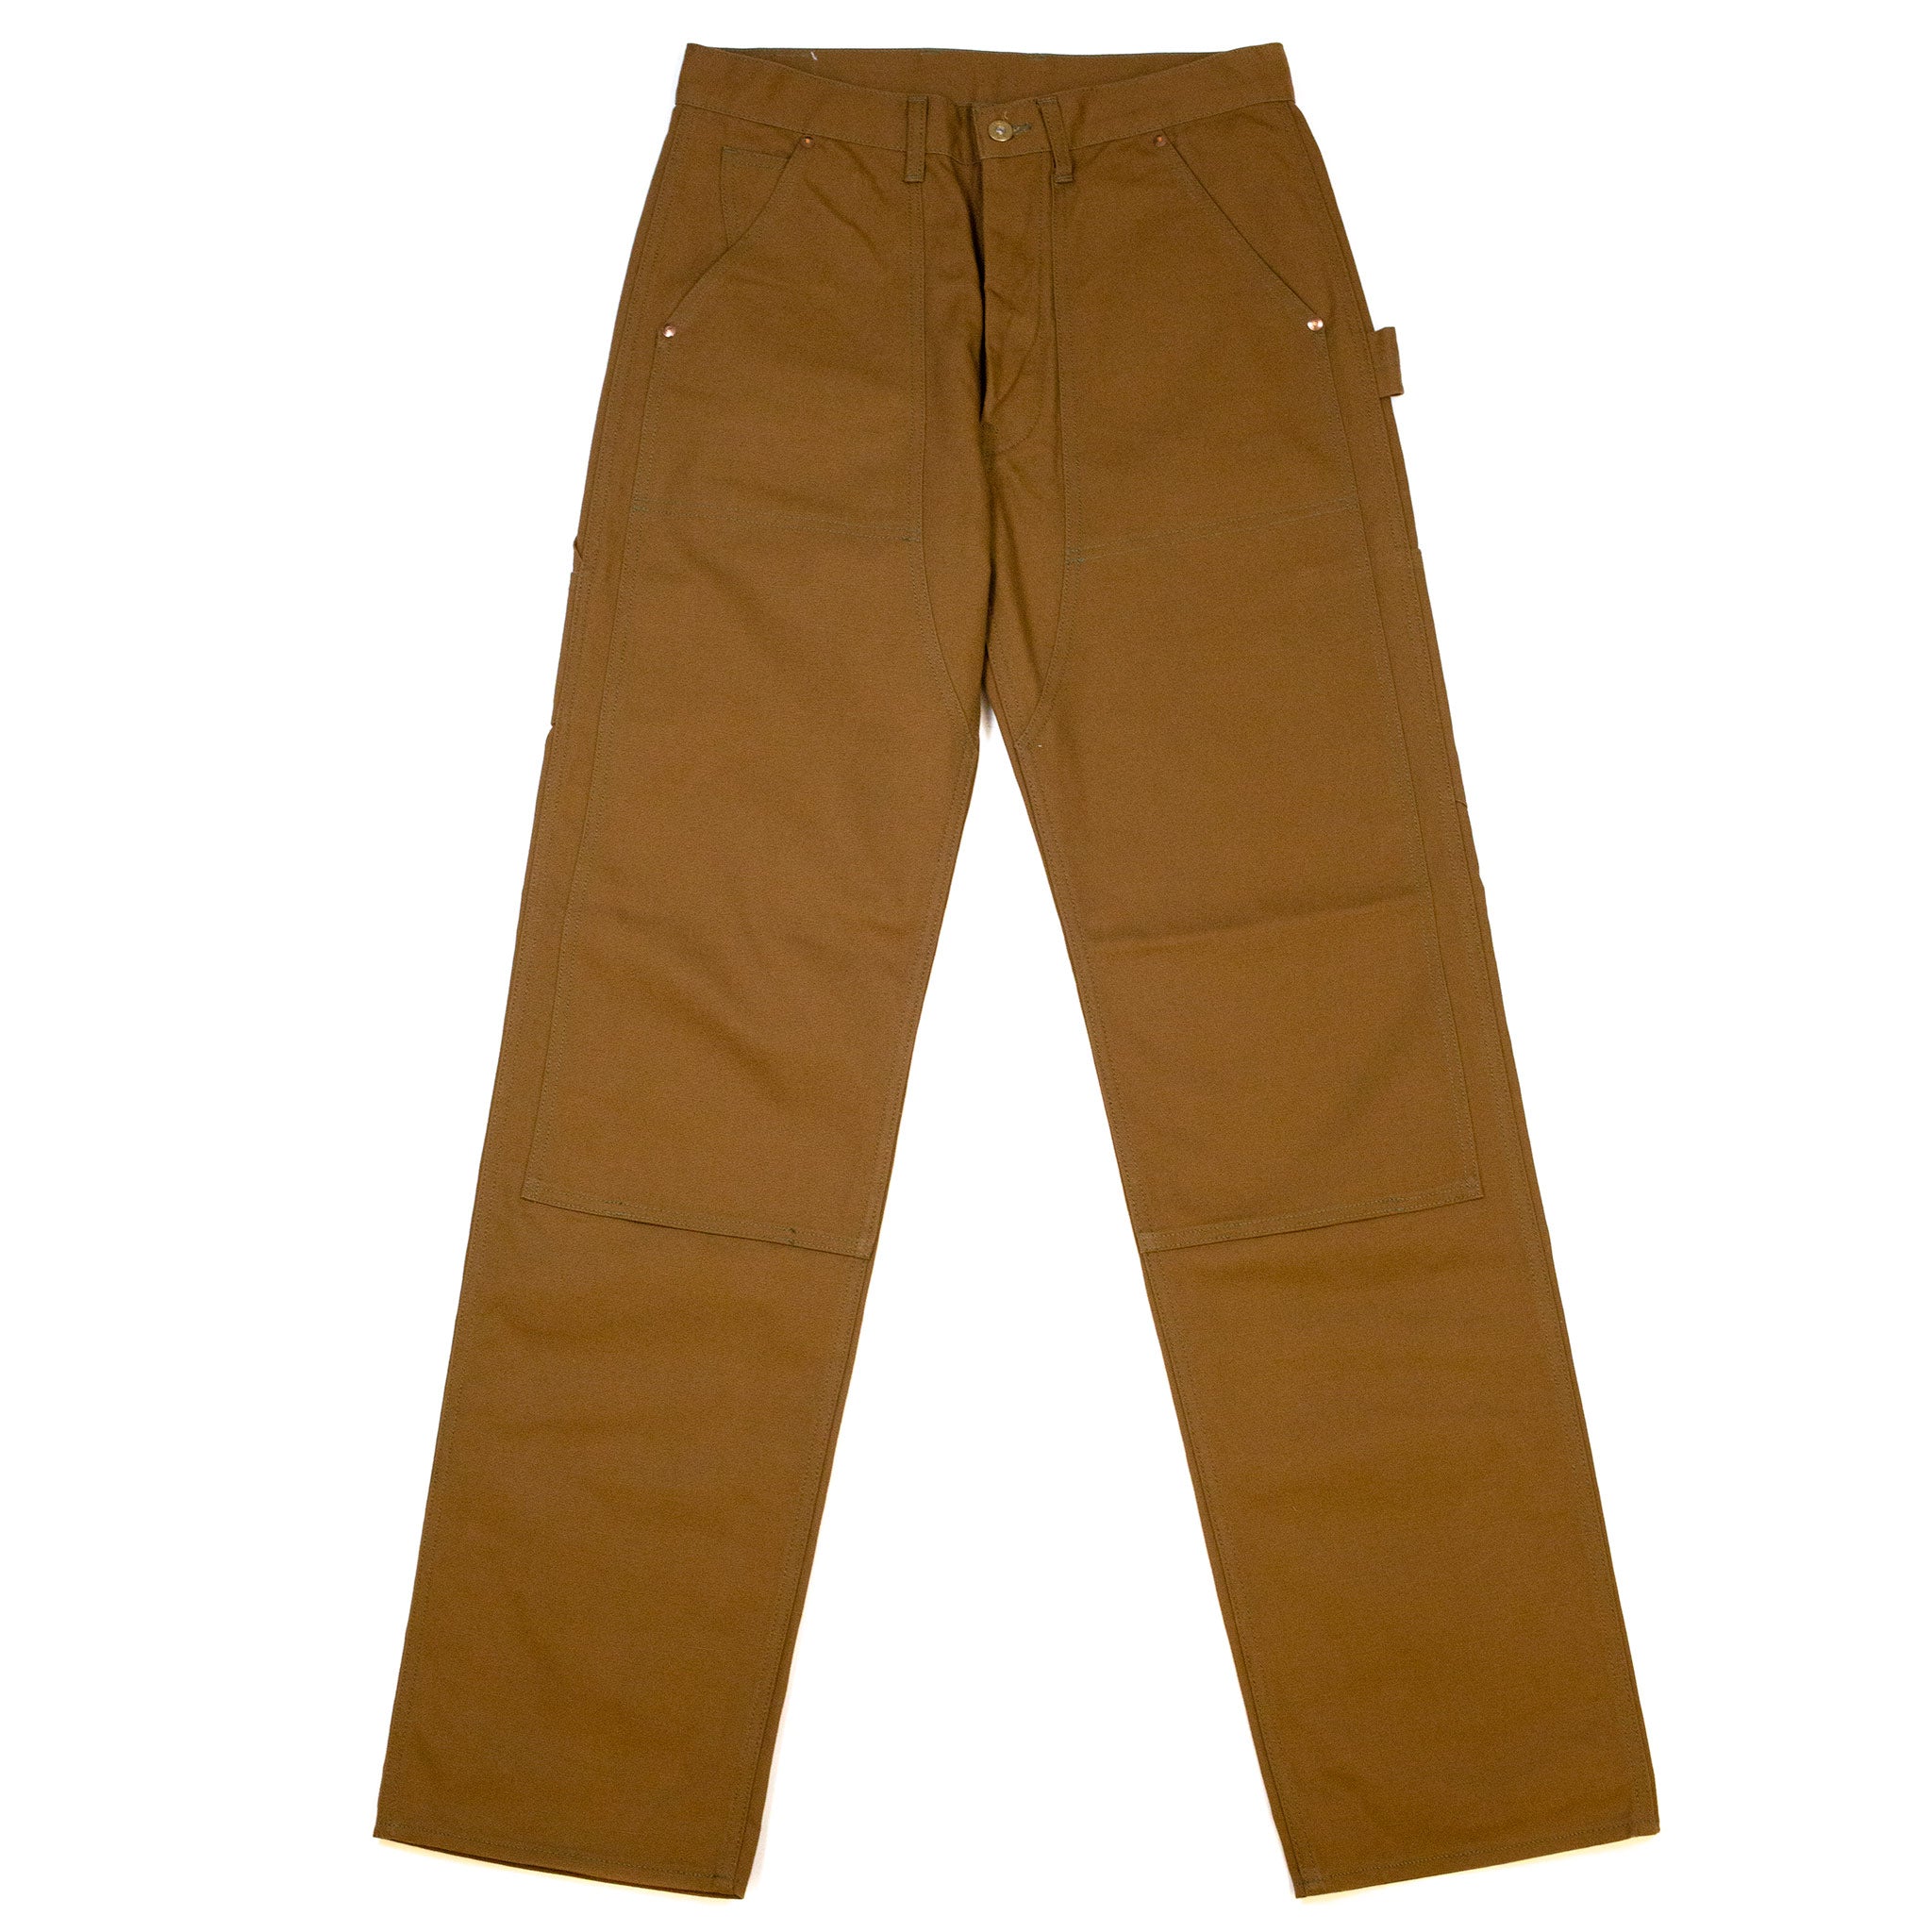 The-Real-McCoy_s-MP19102-8HU-Canvas-Double-Knee-Work-Trousers-Brown